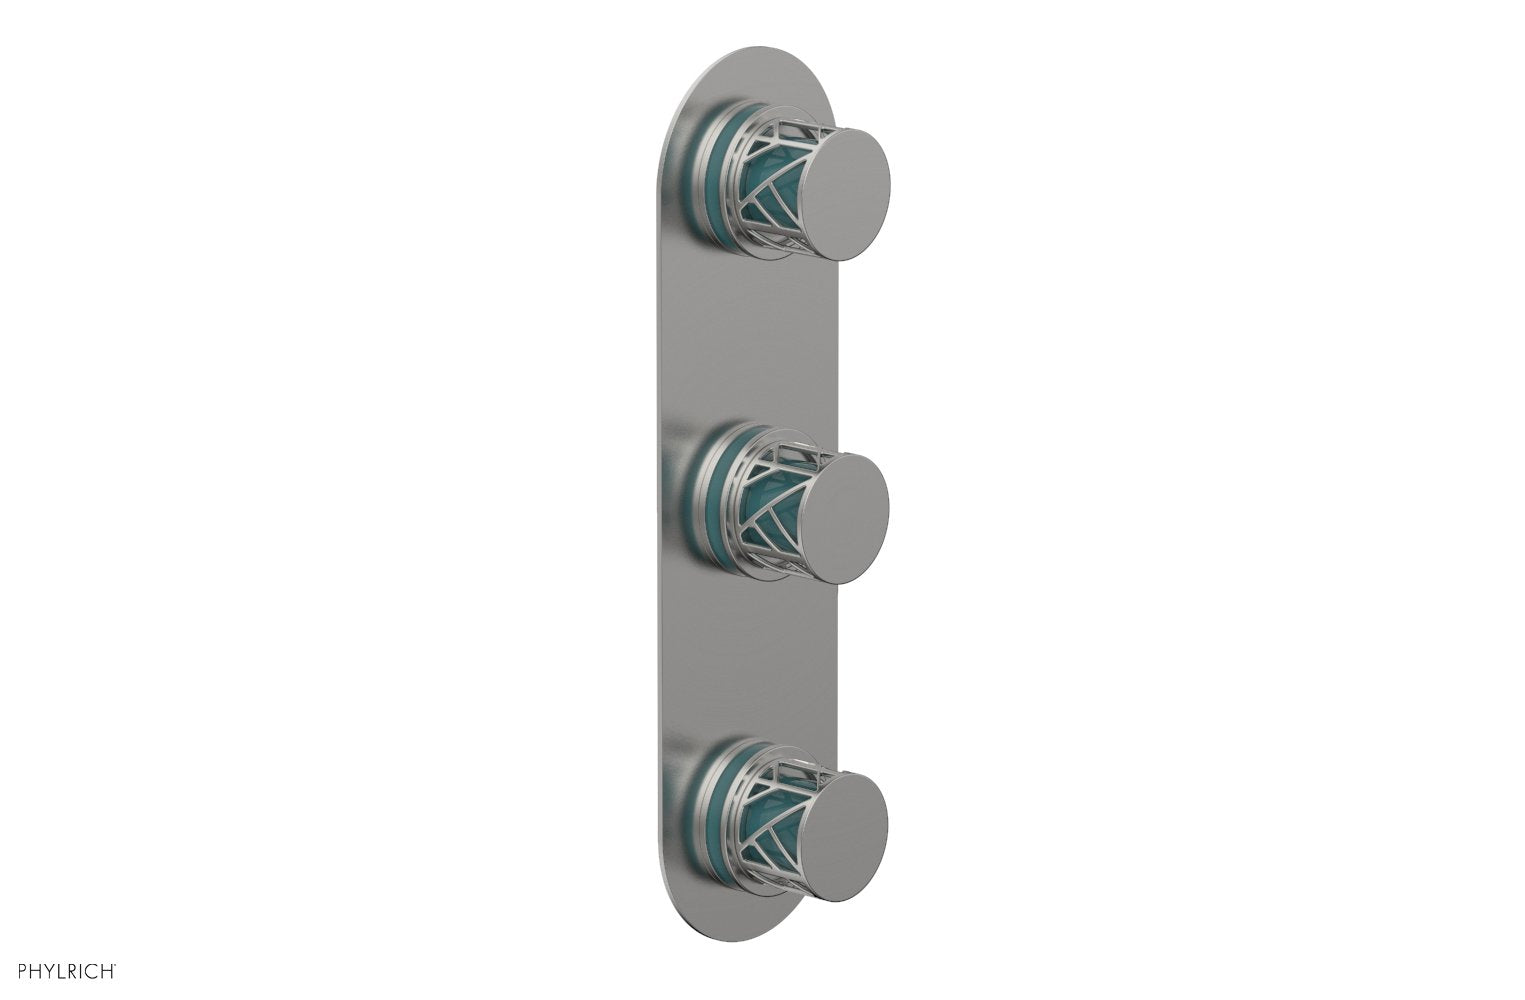 Phylrich JOLIE Thermostatic Valve with Two Volume Control with "Turquoise" Accents